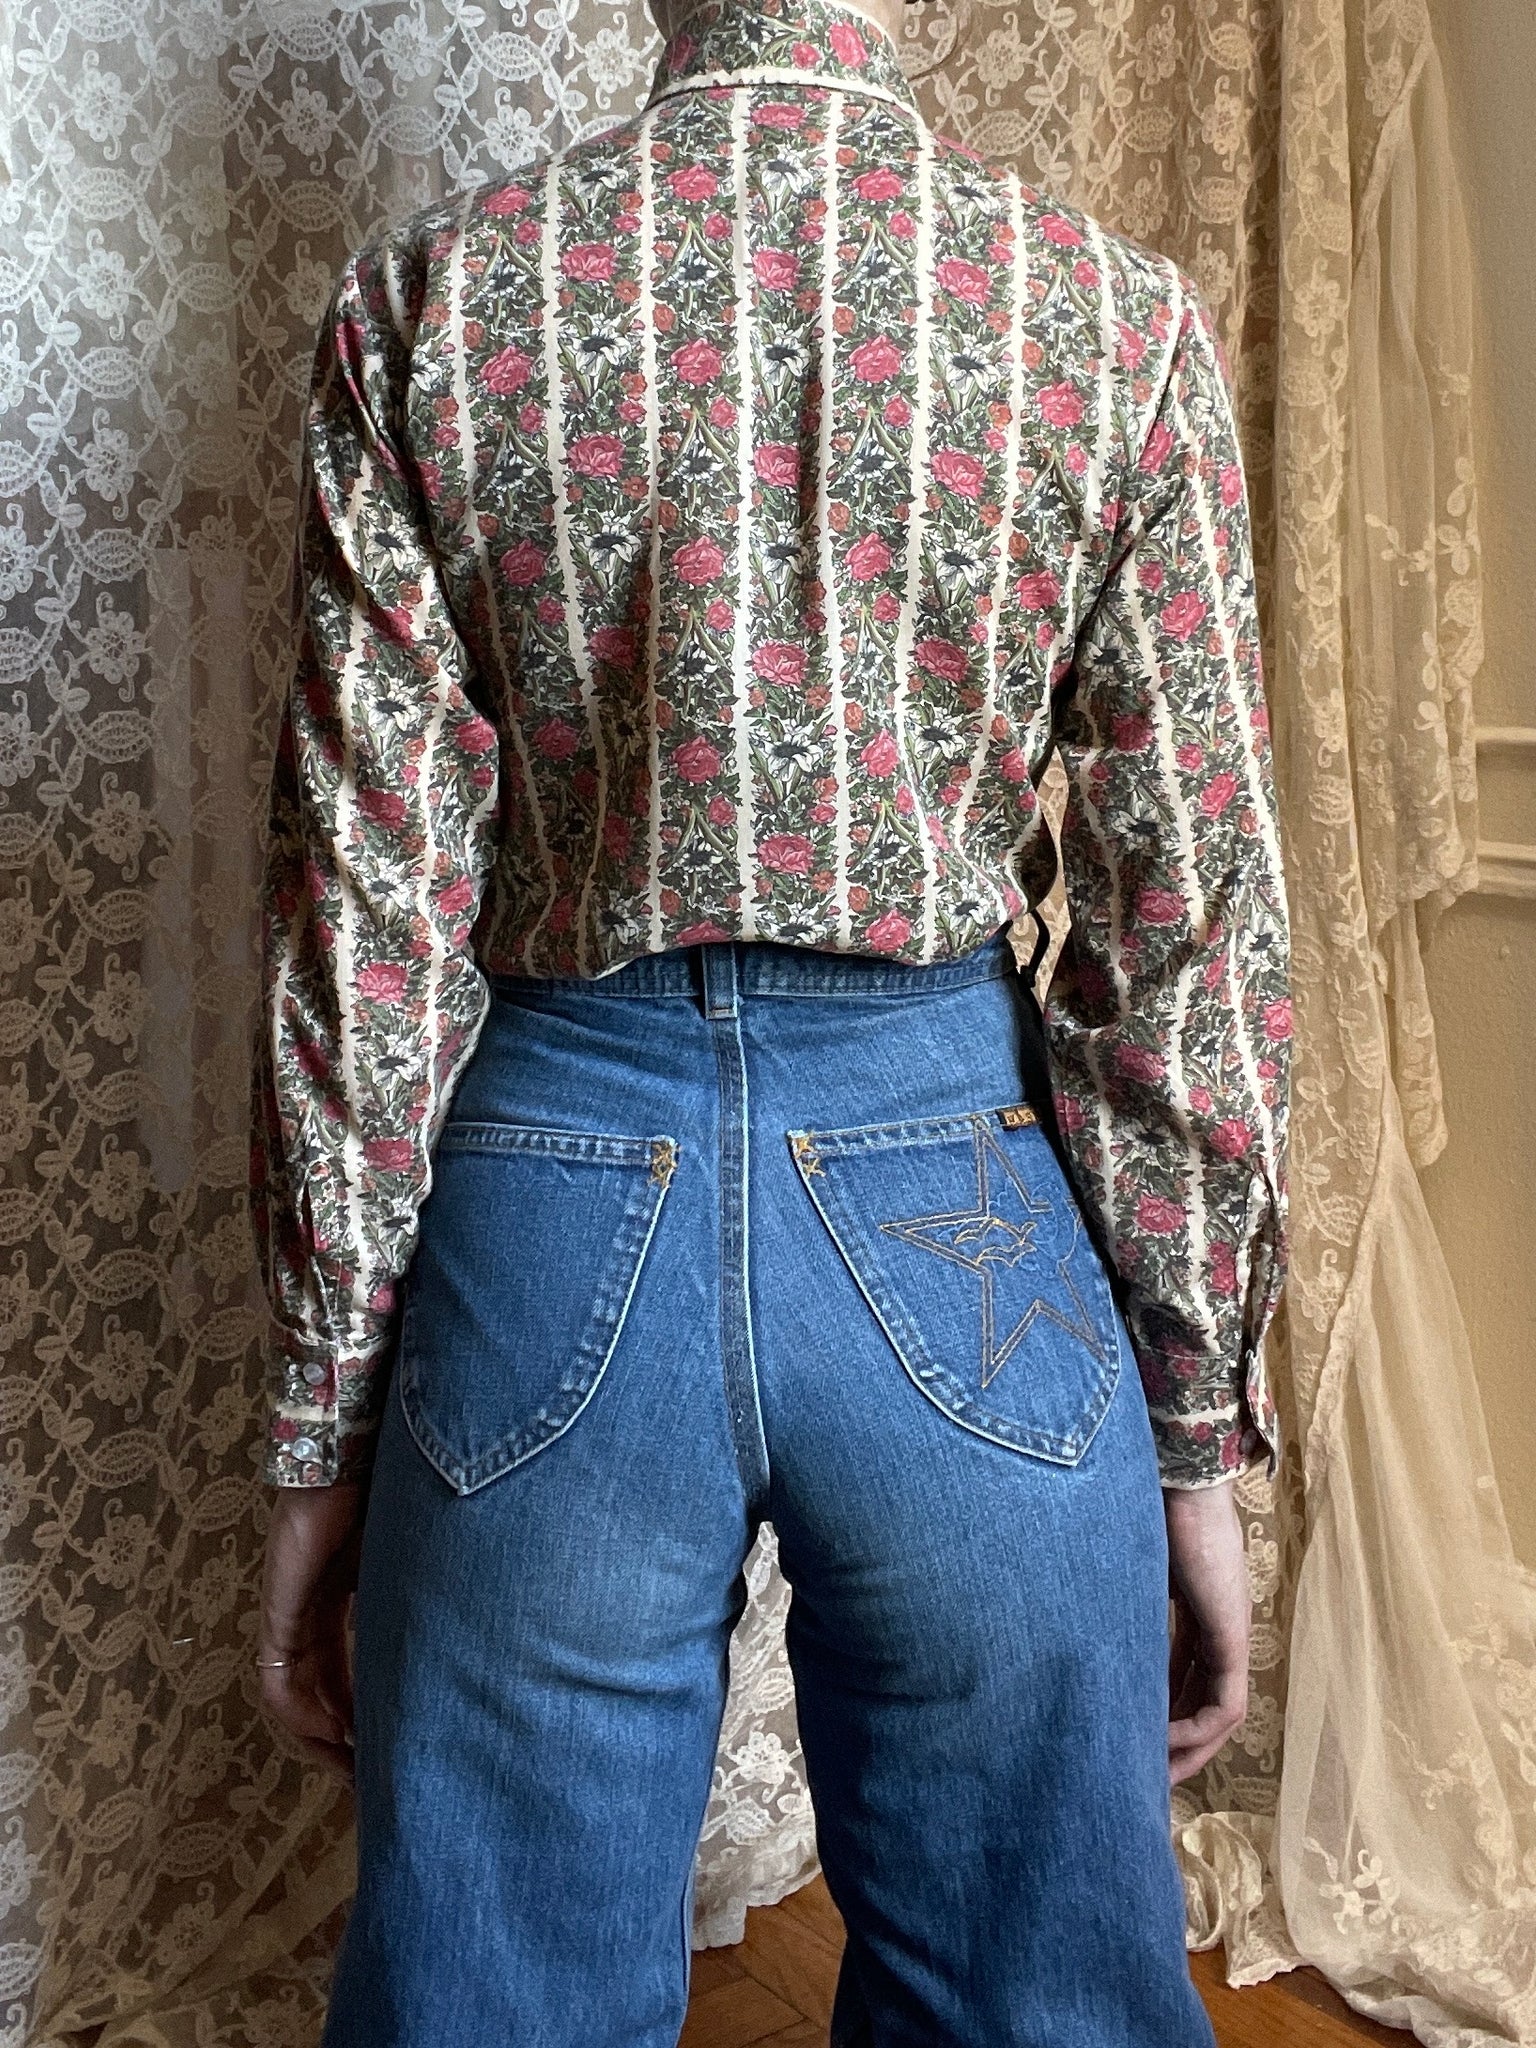 1980s Floral Striped Button Up Shirt